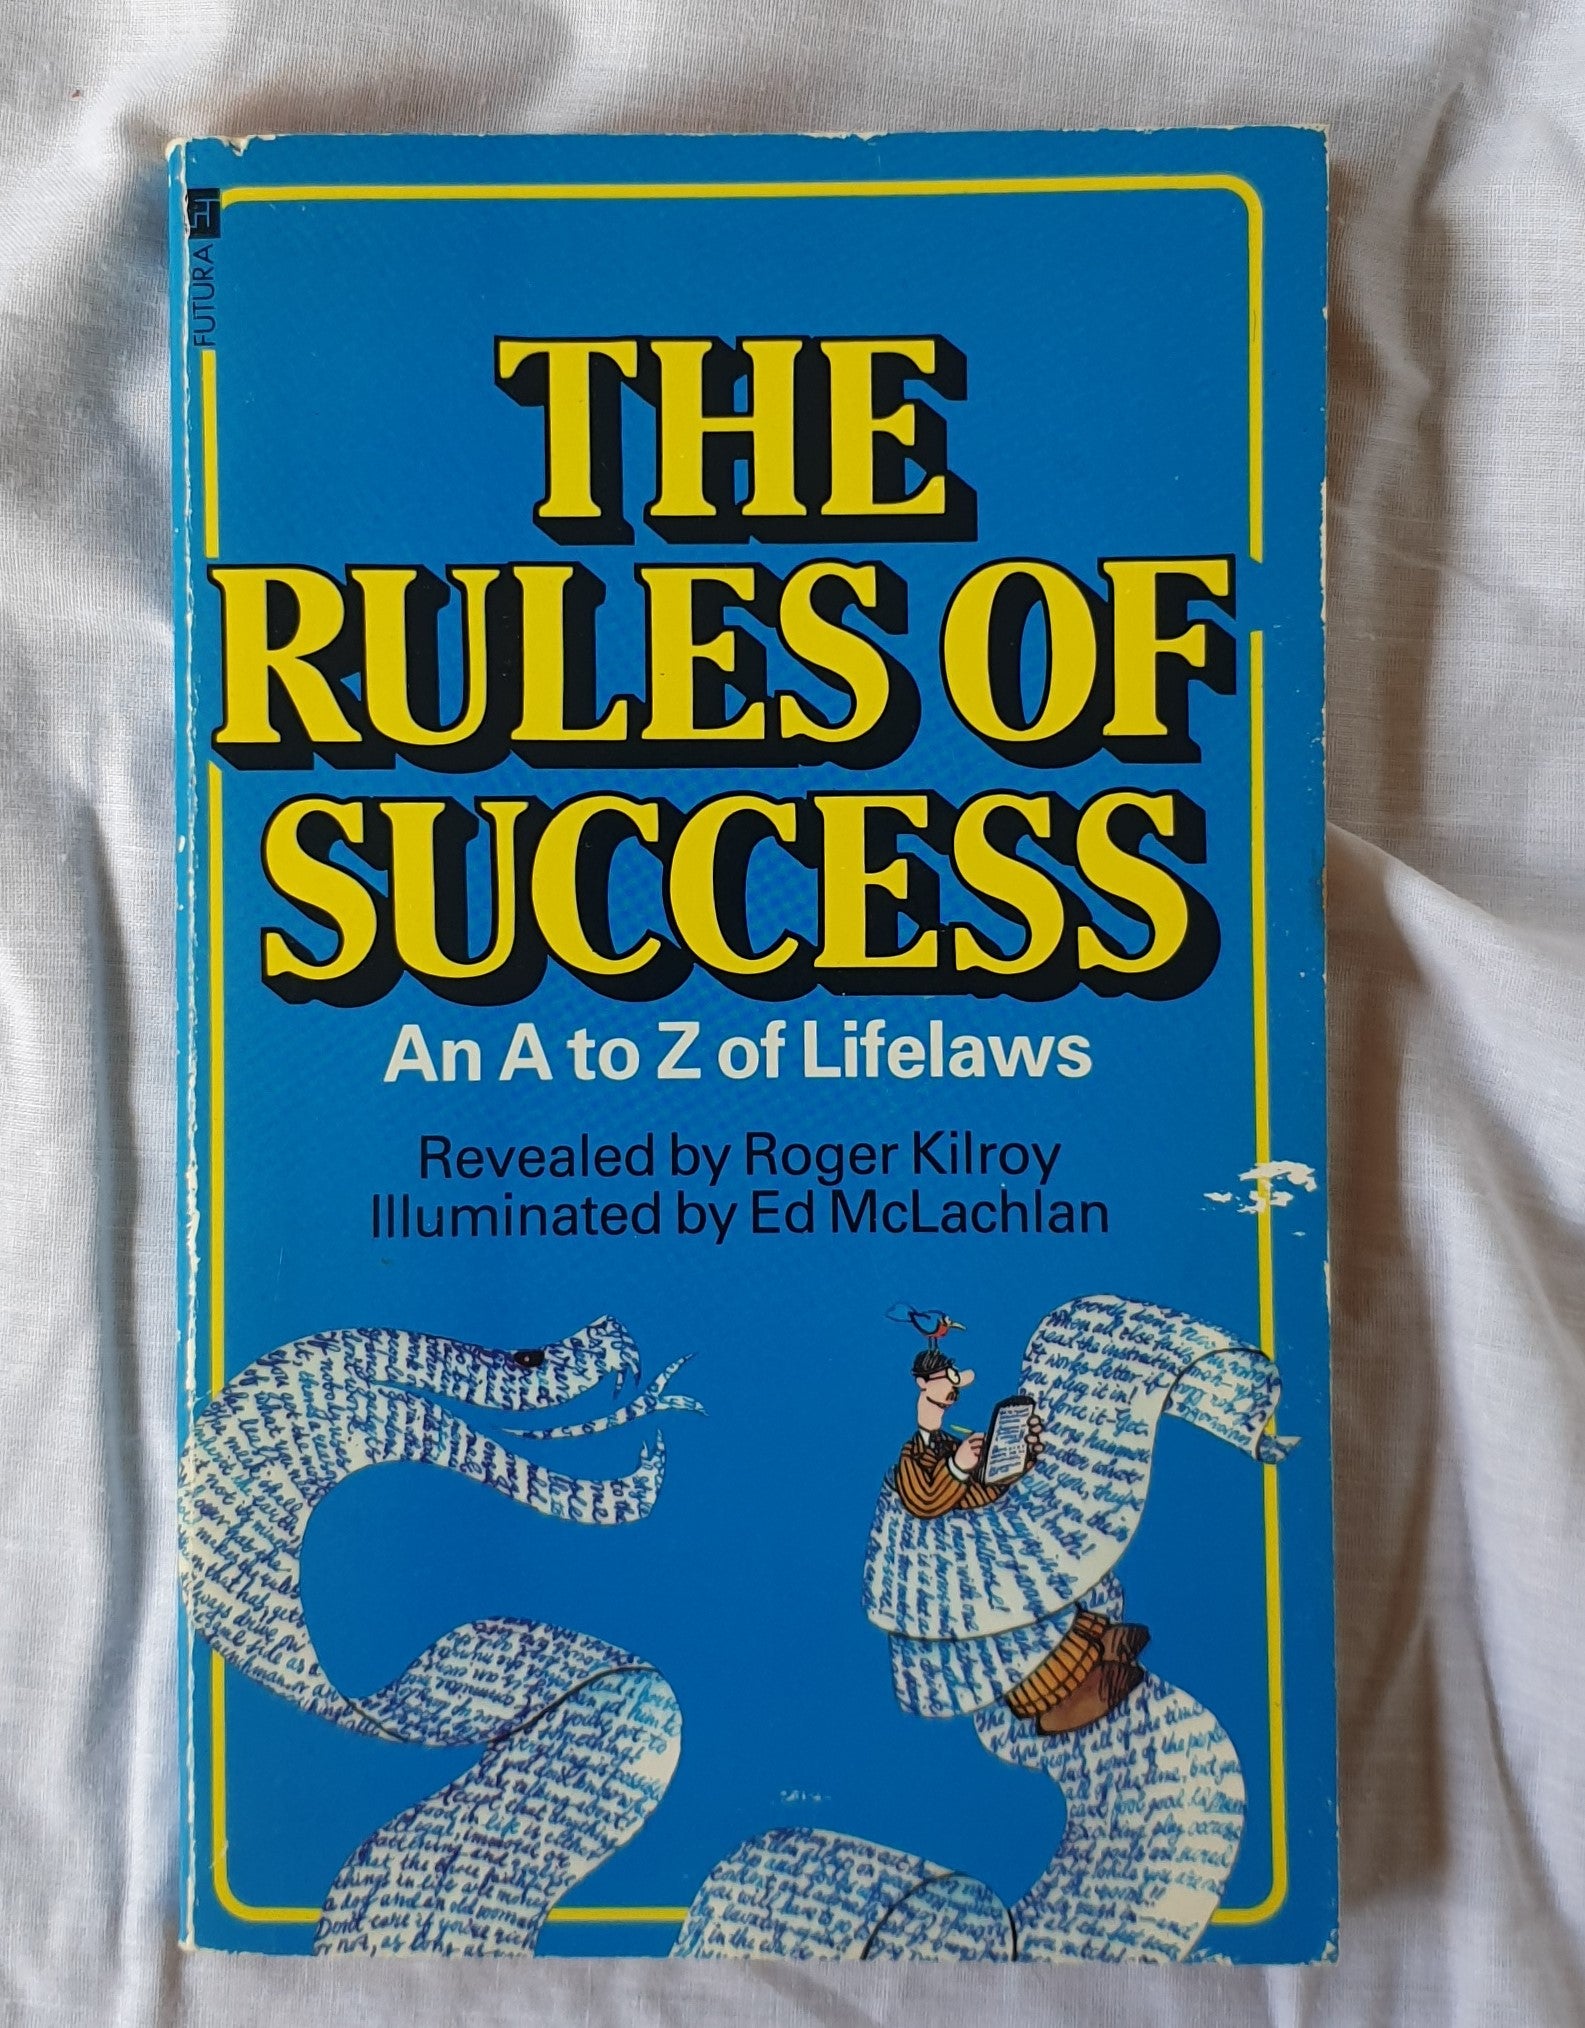 The Rules of Success by Roger Kilroy